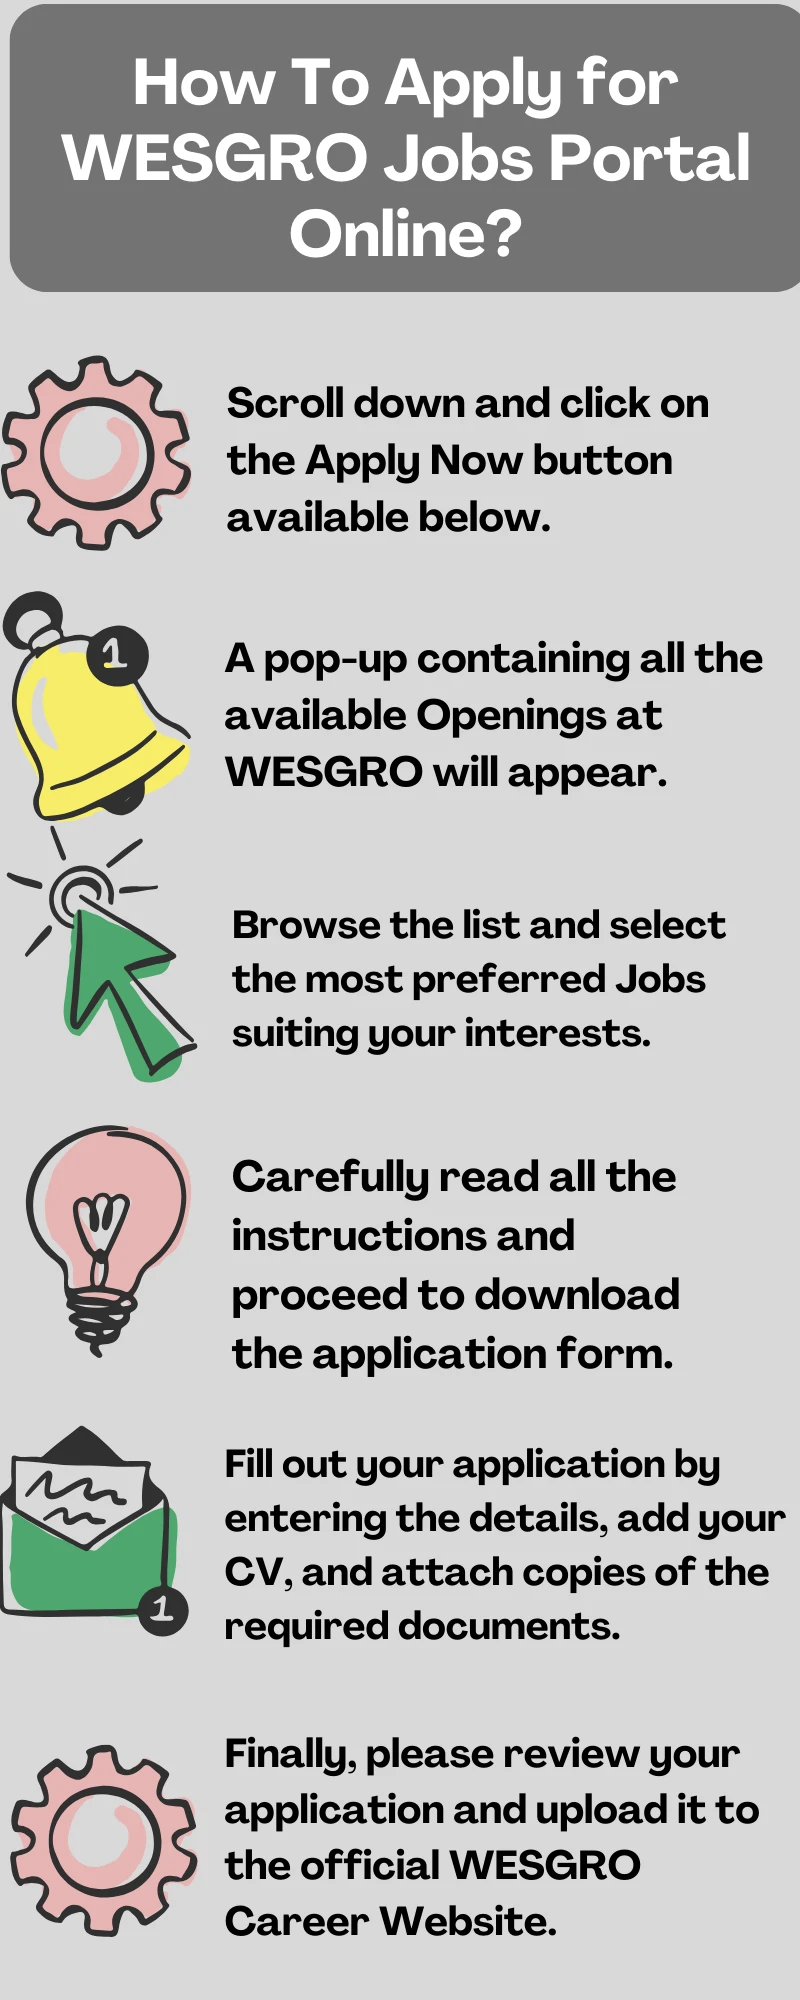 How To Apply for WESGRO Jobs Portal Online?